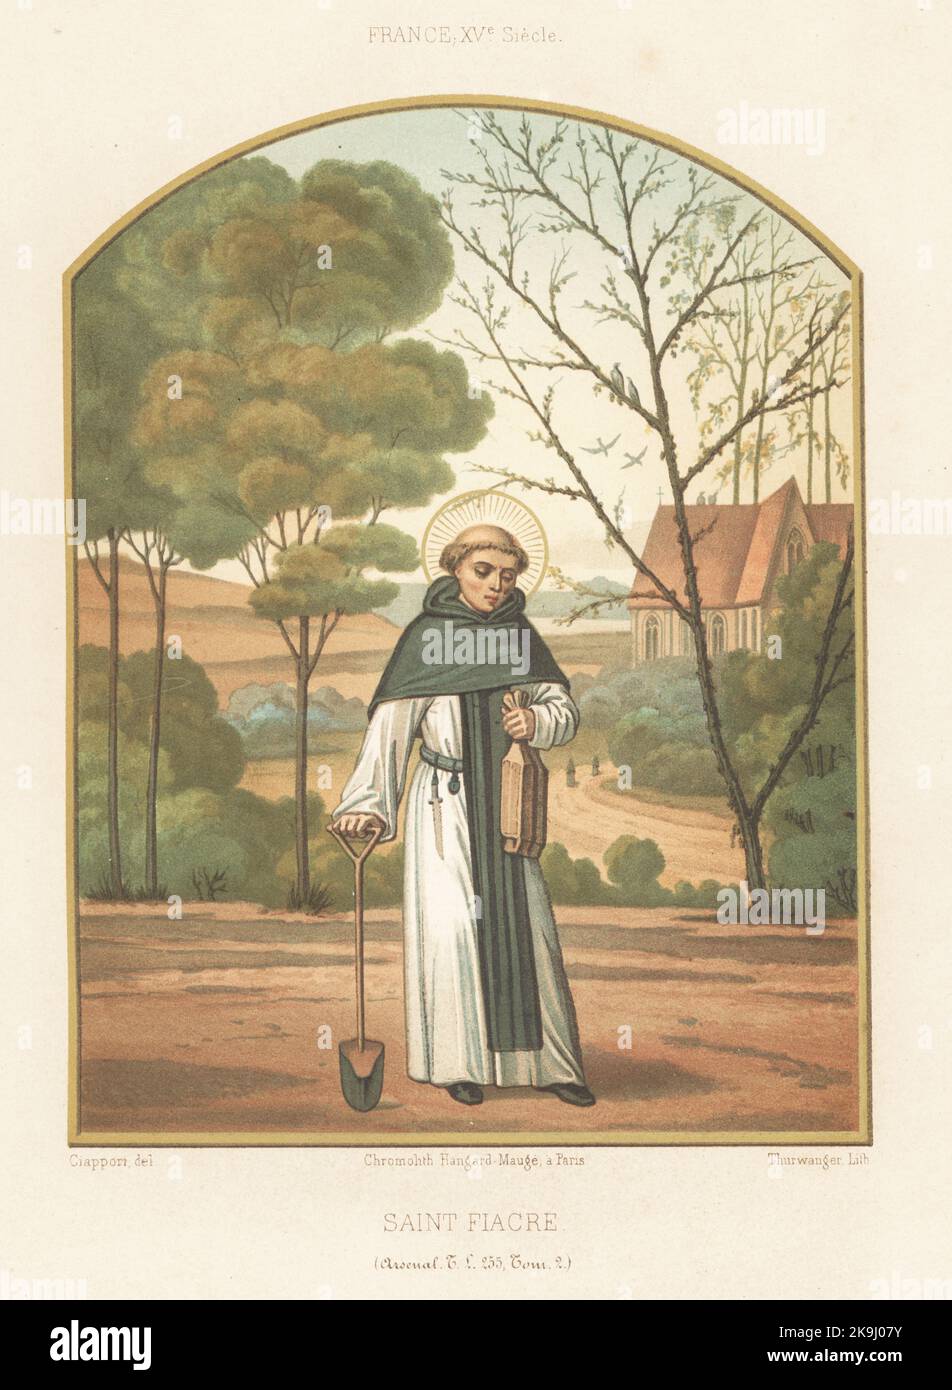 Saint Fiacre of Breuil with spade and bag of seeds. Catholic priest, abbot, hermit and gardener, c. 600-670. Taken from a 15th century Book of Hours, livre d'heures, MS Tl 255, Tom. 2, Bibliotheque de l'Arsenal. Chromolithograph by Thurwanger after an illustration by Claudius Joseph Ciappori from Charles Louandre’s Les Arts Somptuaires, The Sumptuary Arts, Hangard-Mauge, Paris, 1858. Stock Photo